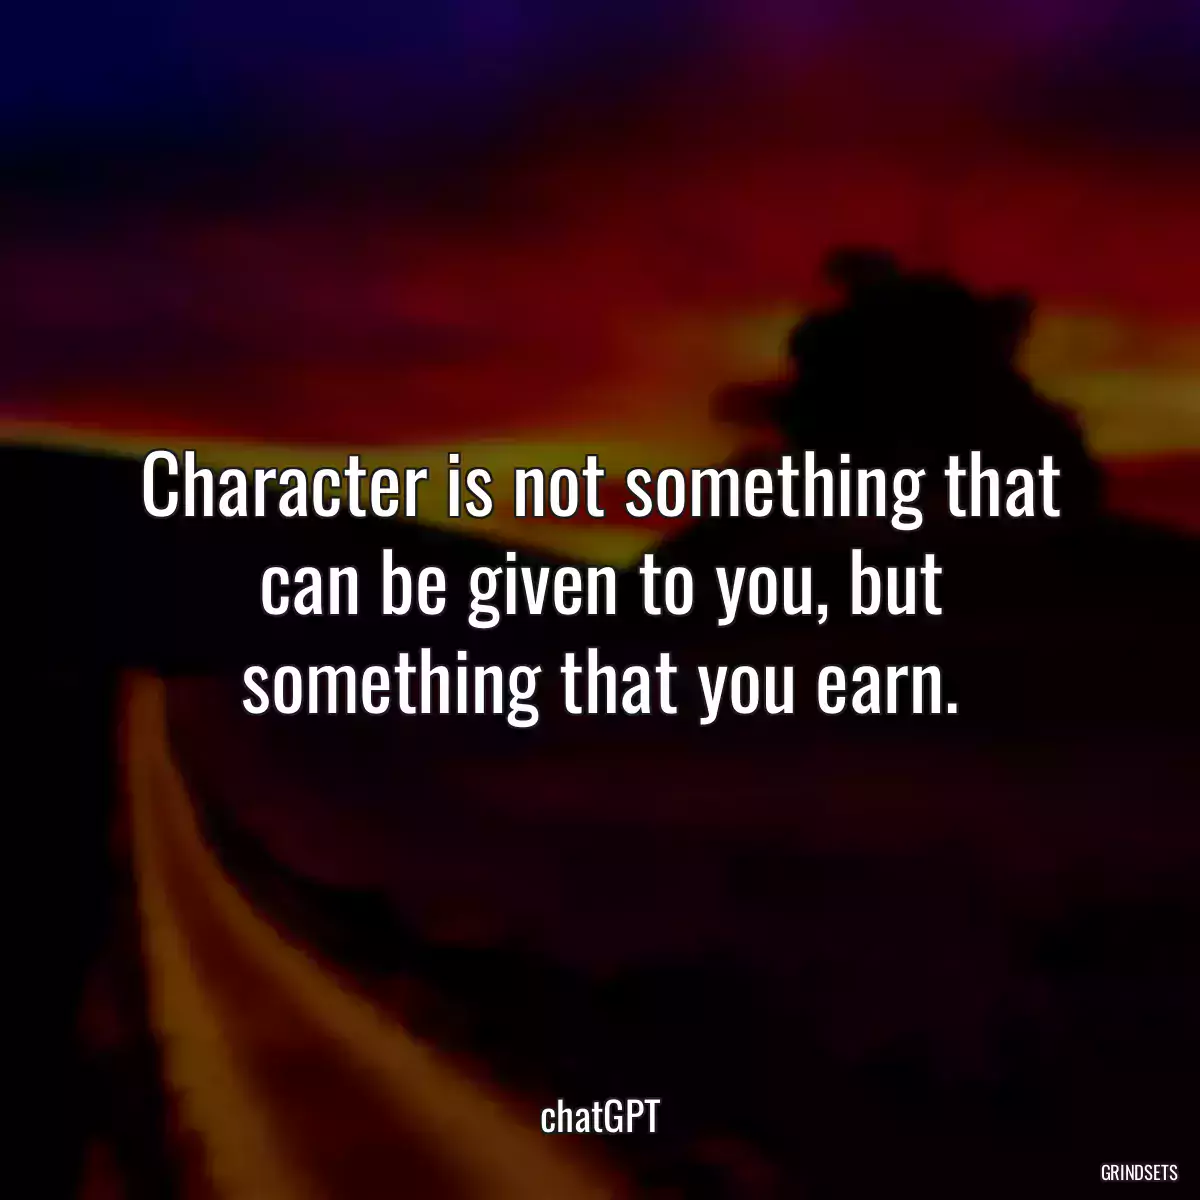 Character is not something that can be given to you, but something that you earn.